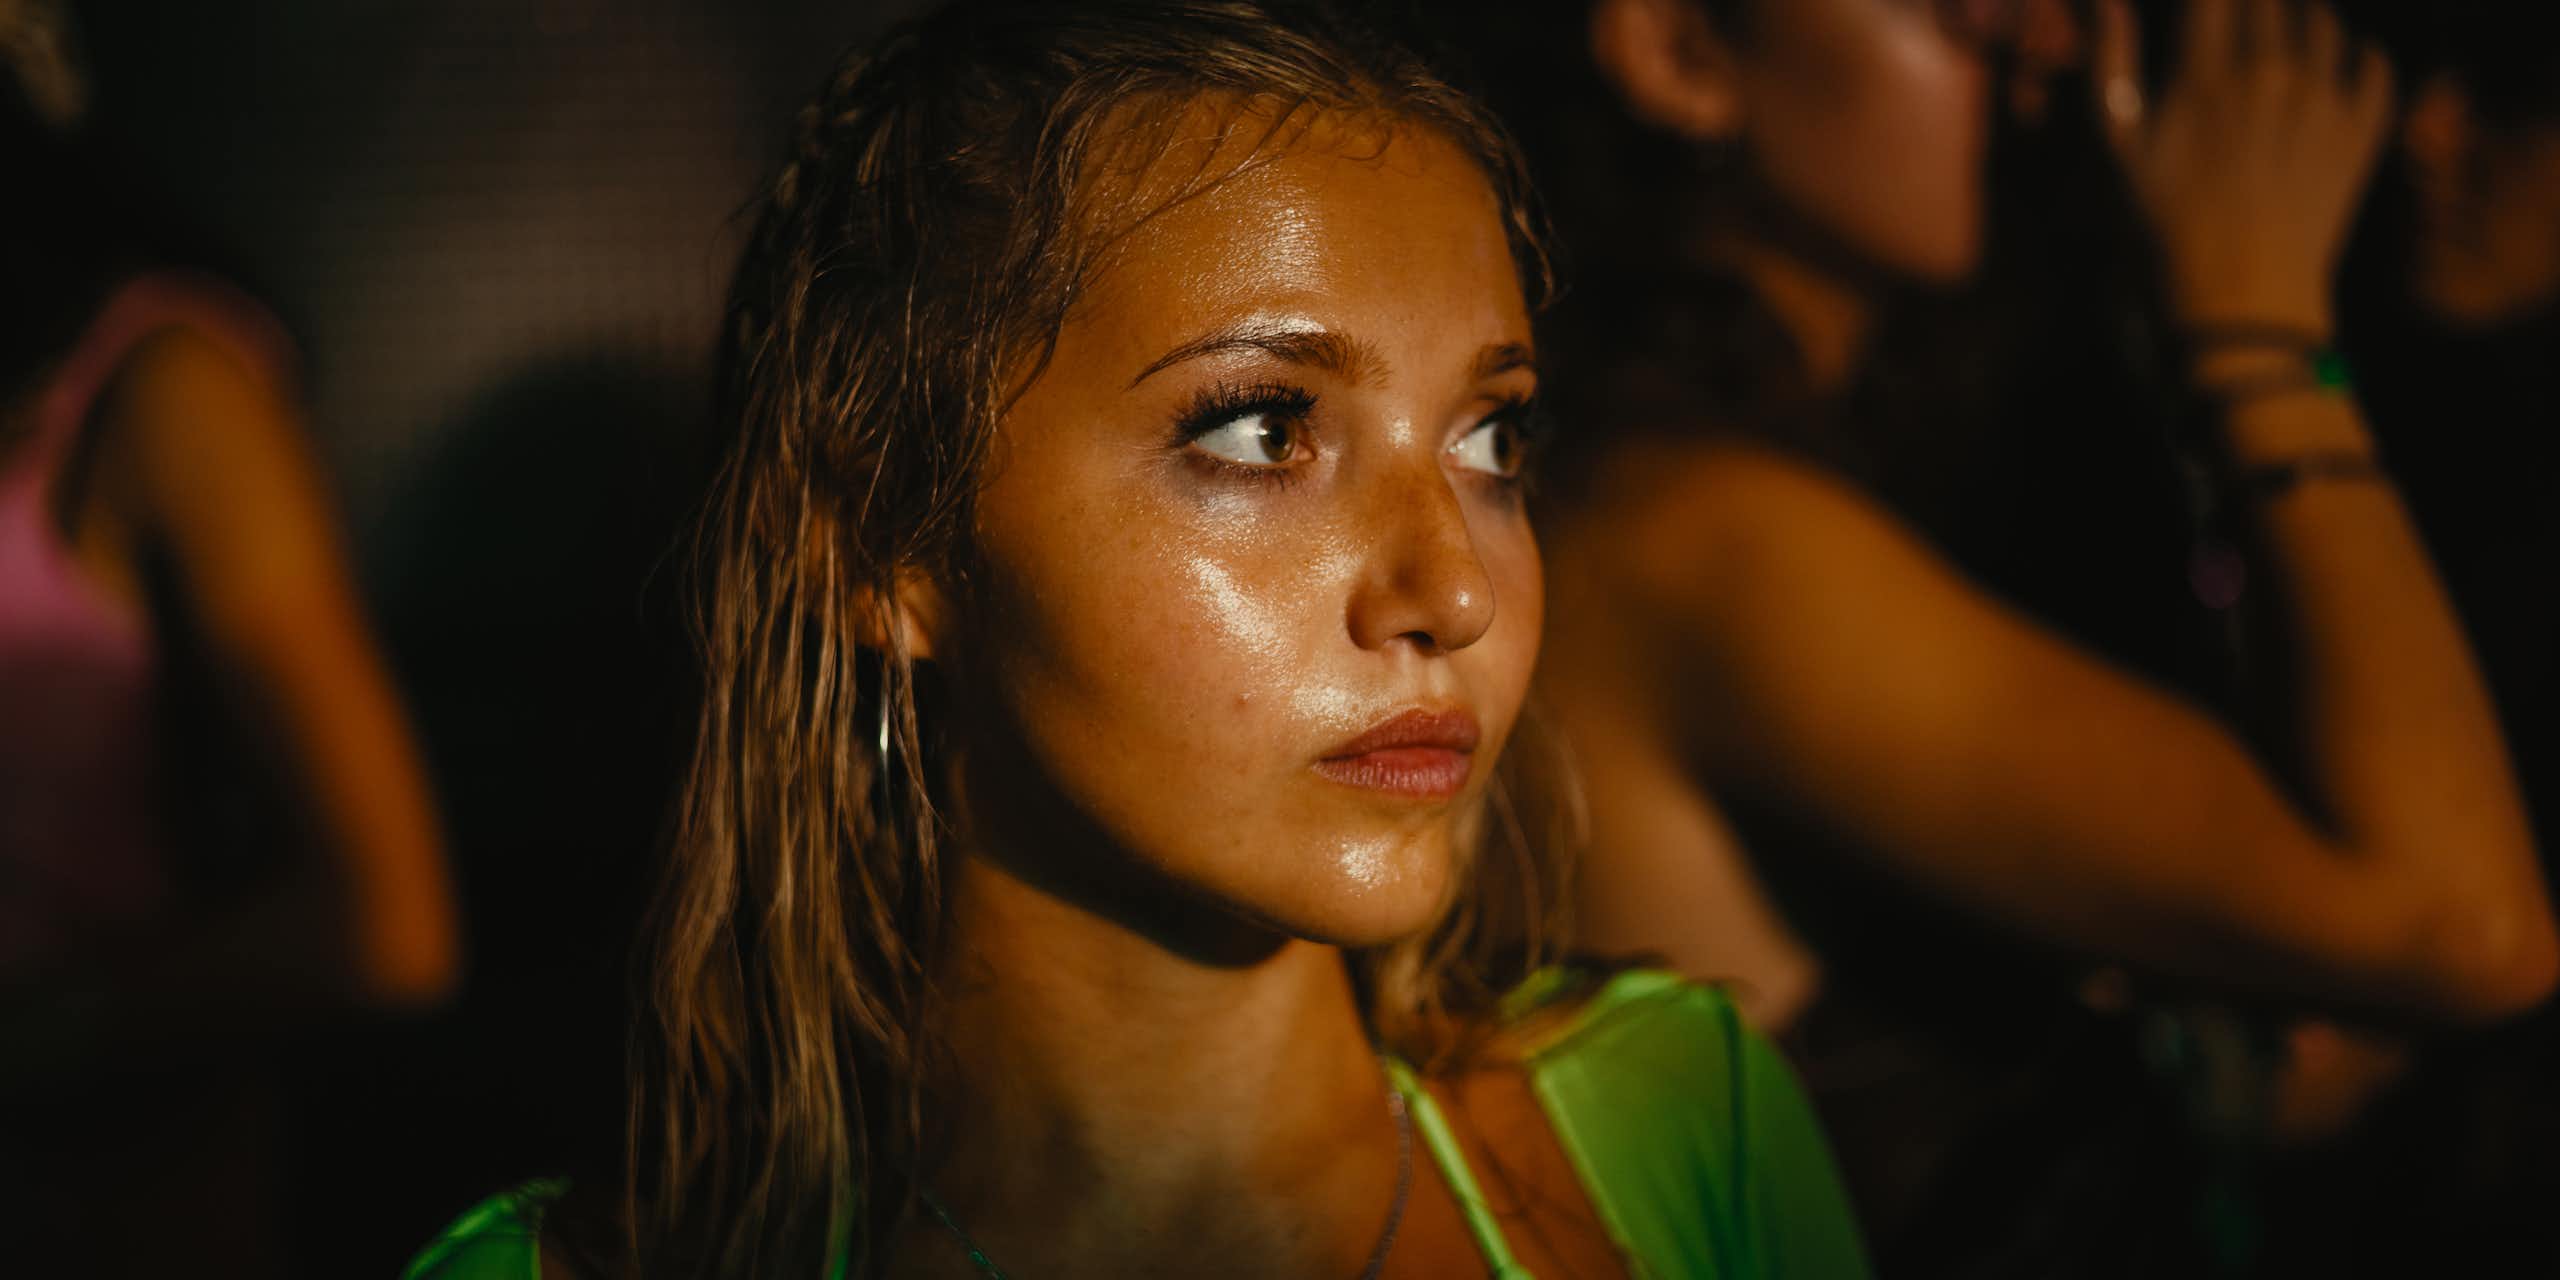 Photo of girl in club